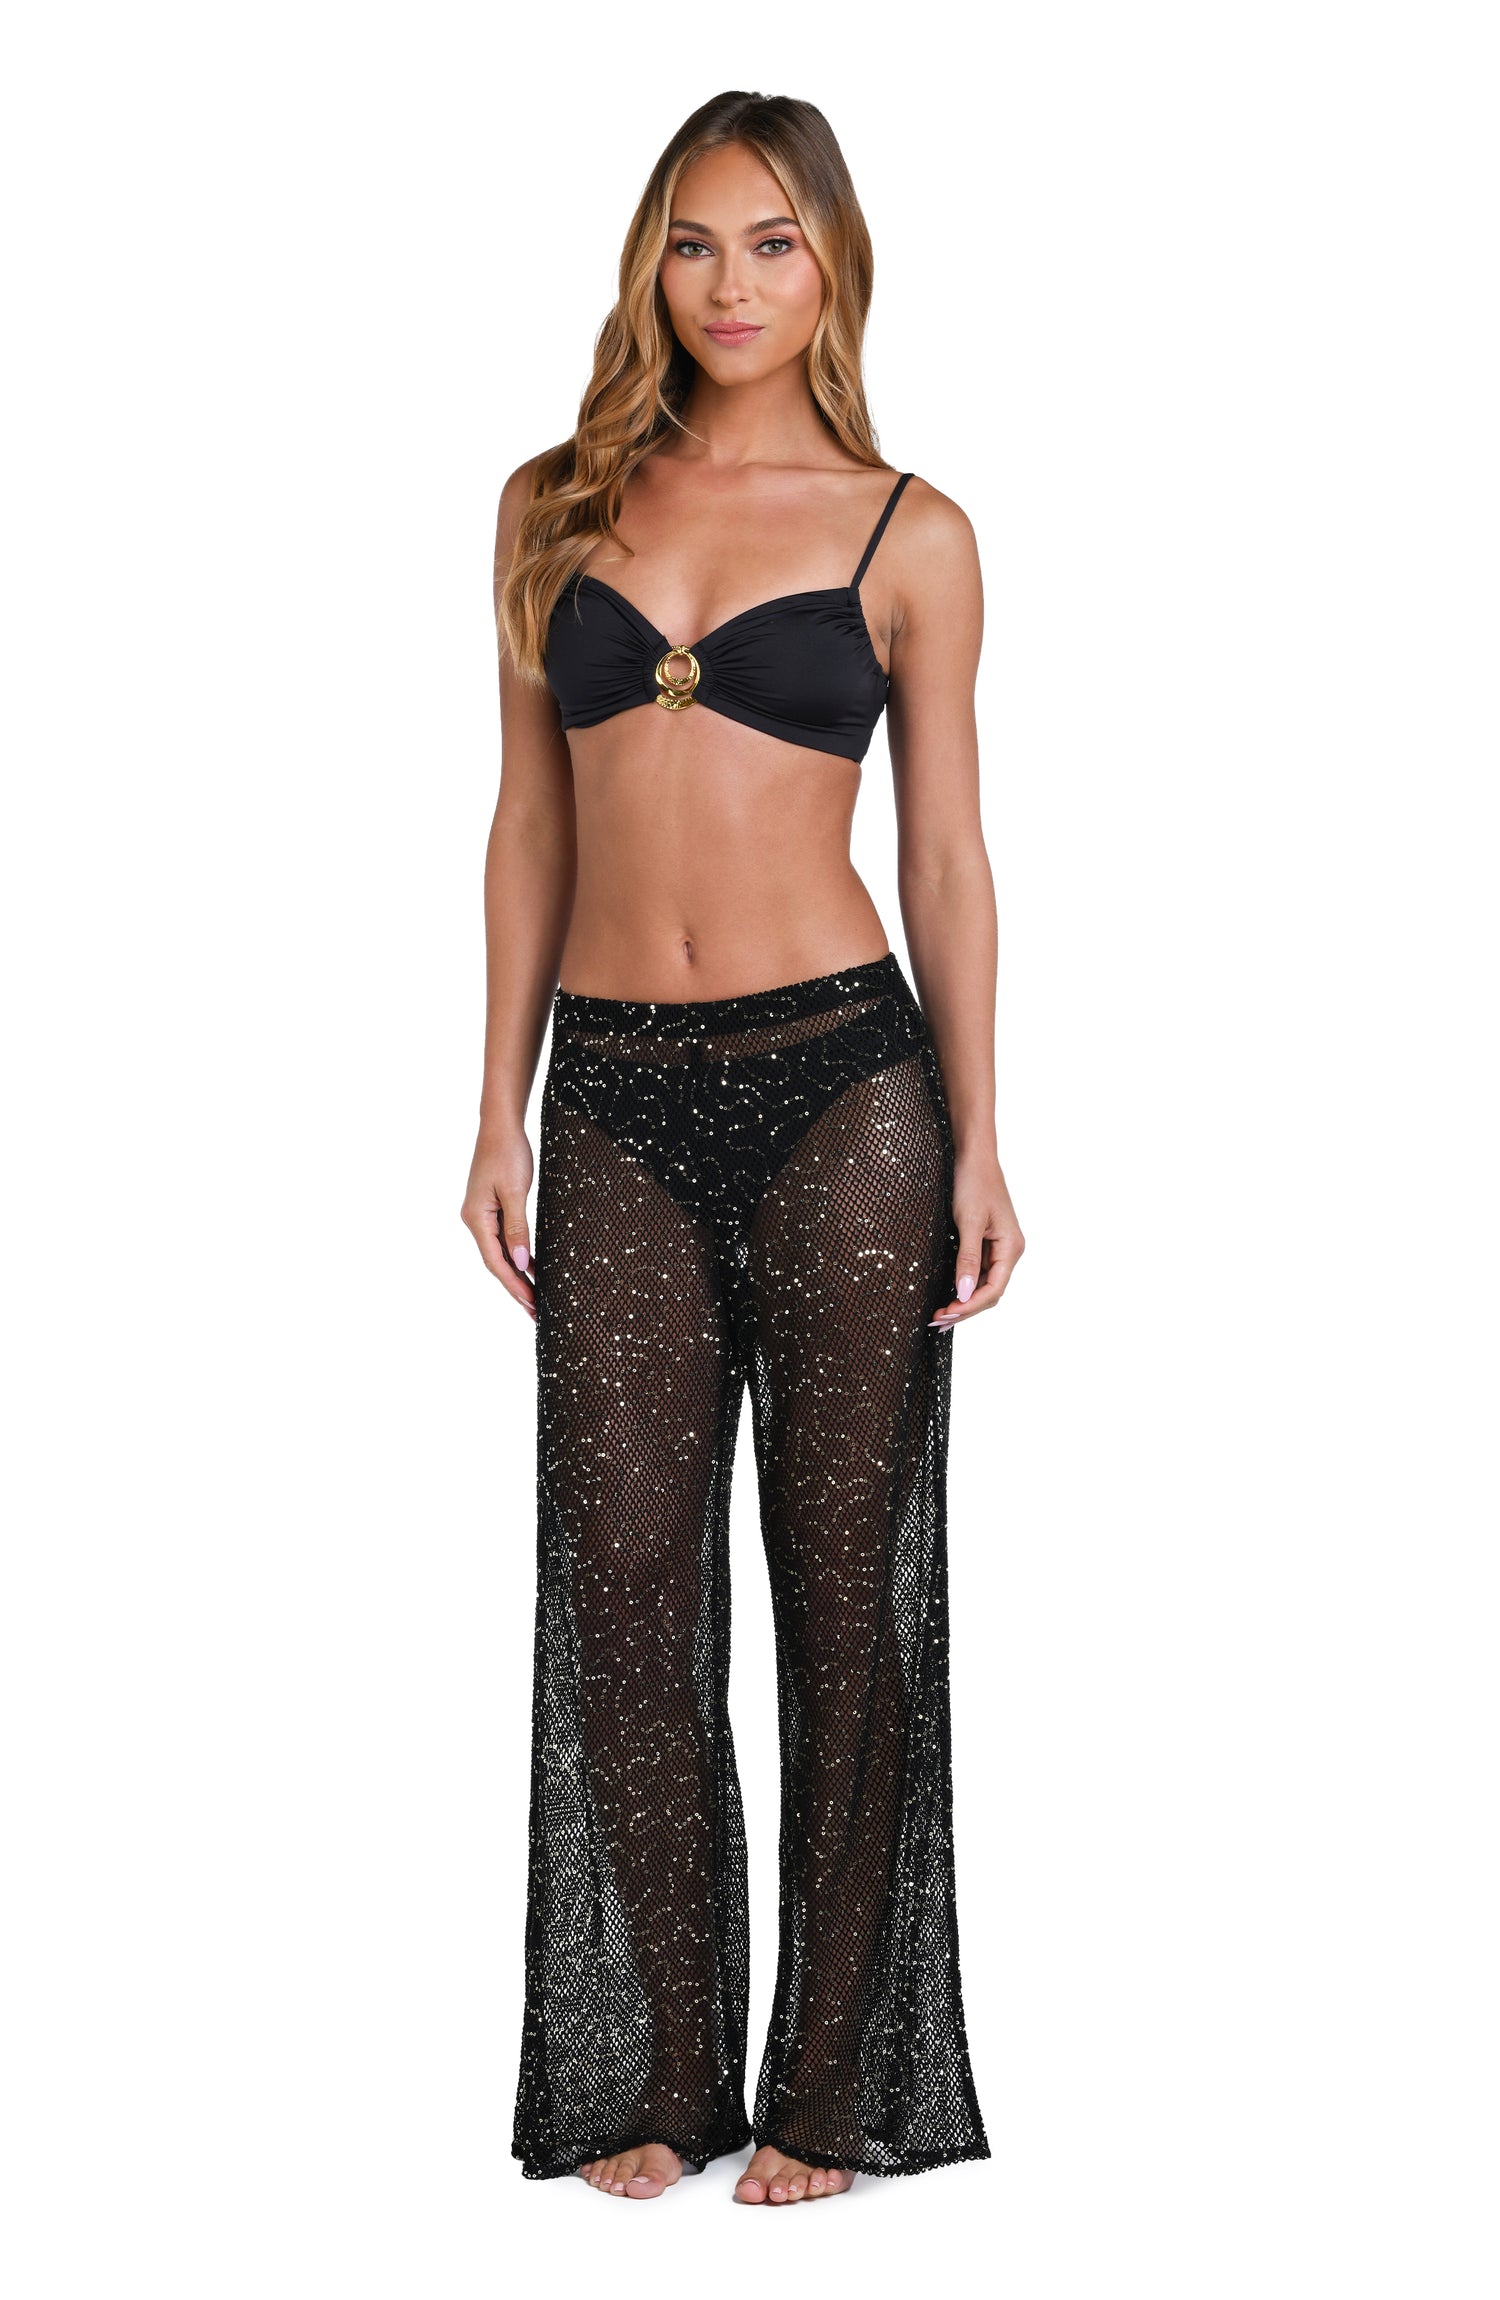 Model is wearing a black colored sheer beach pant cover up.